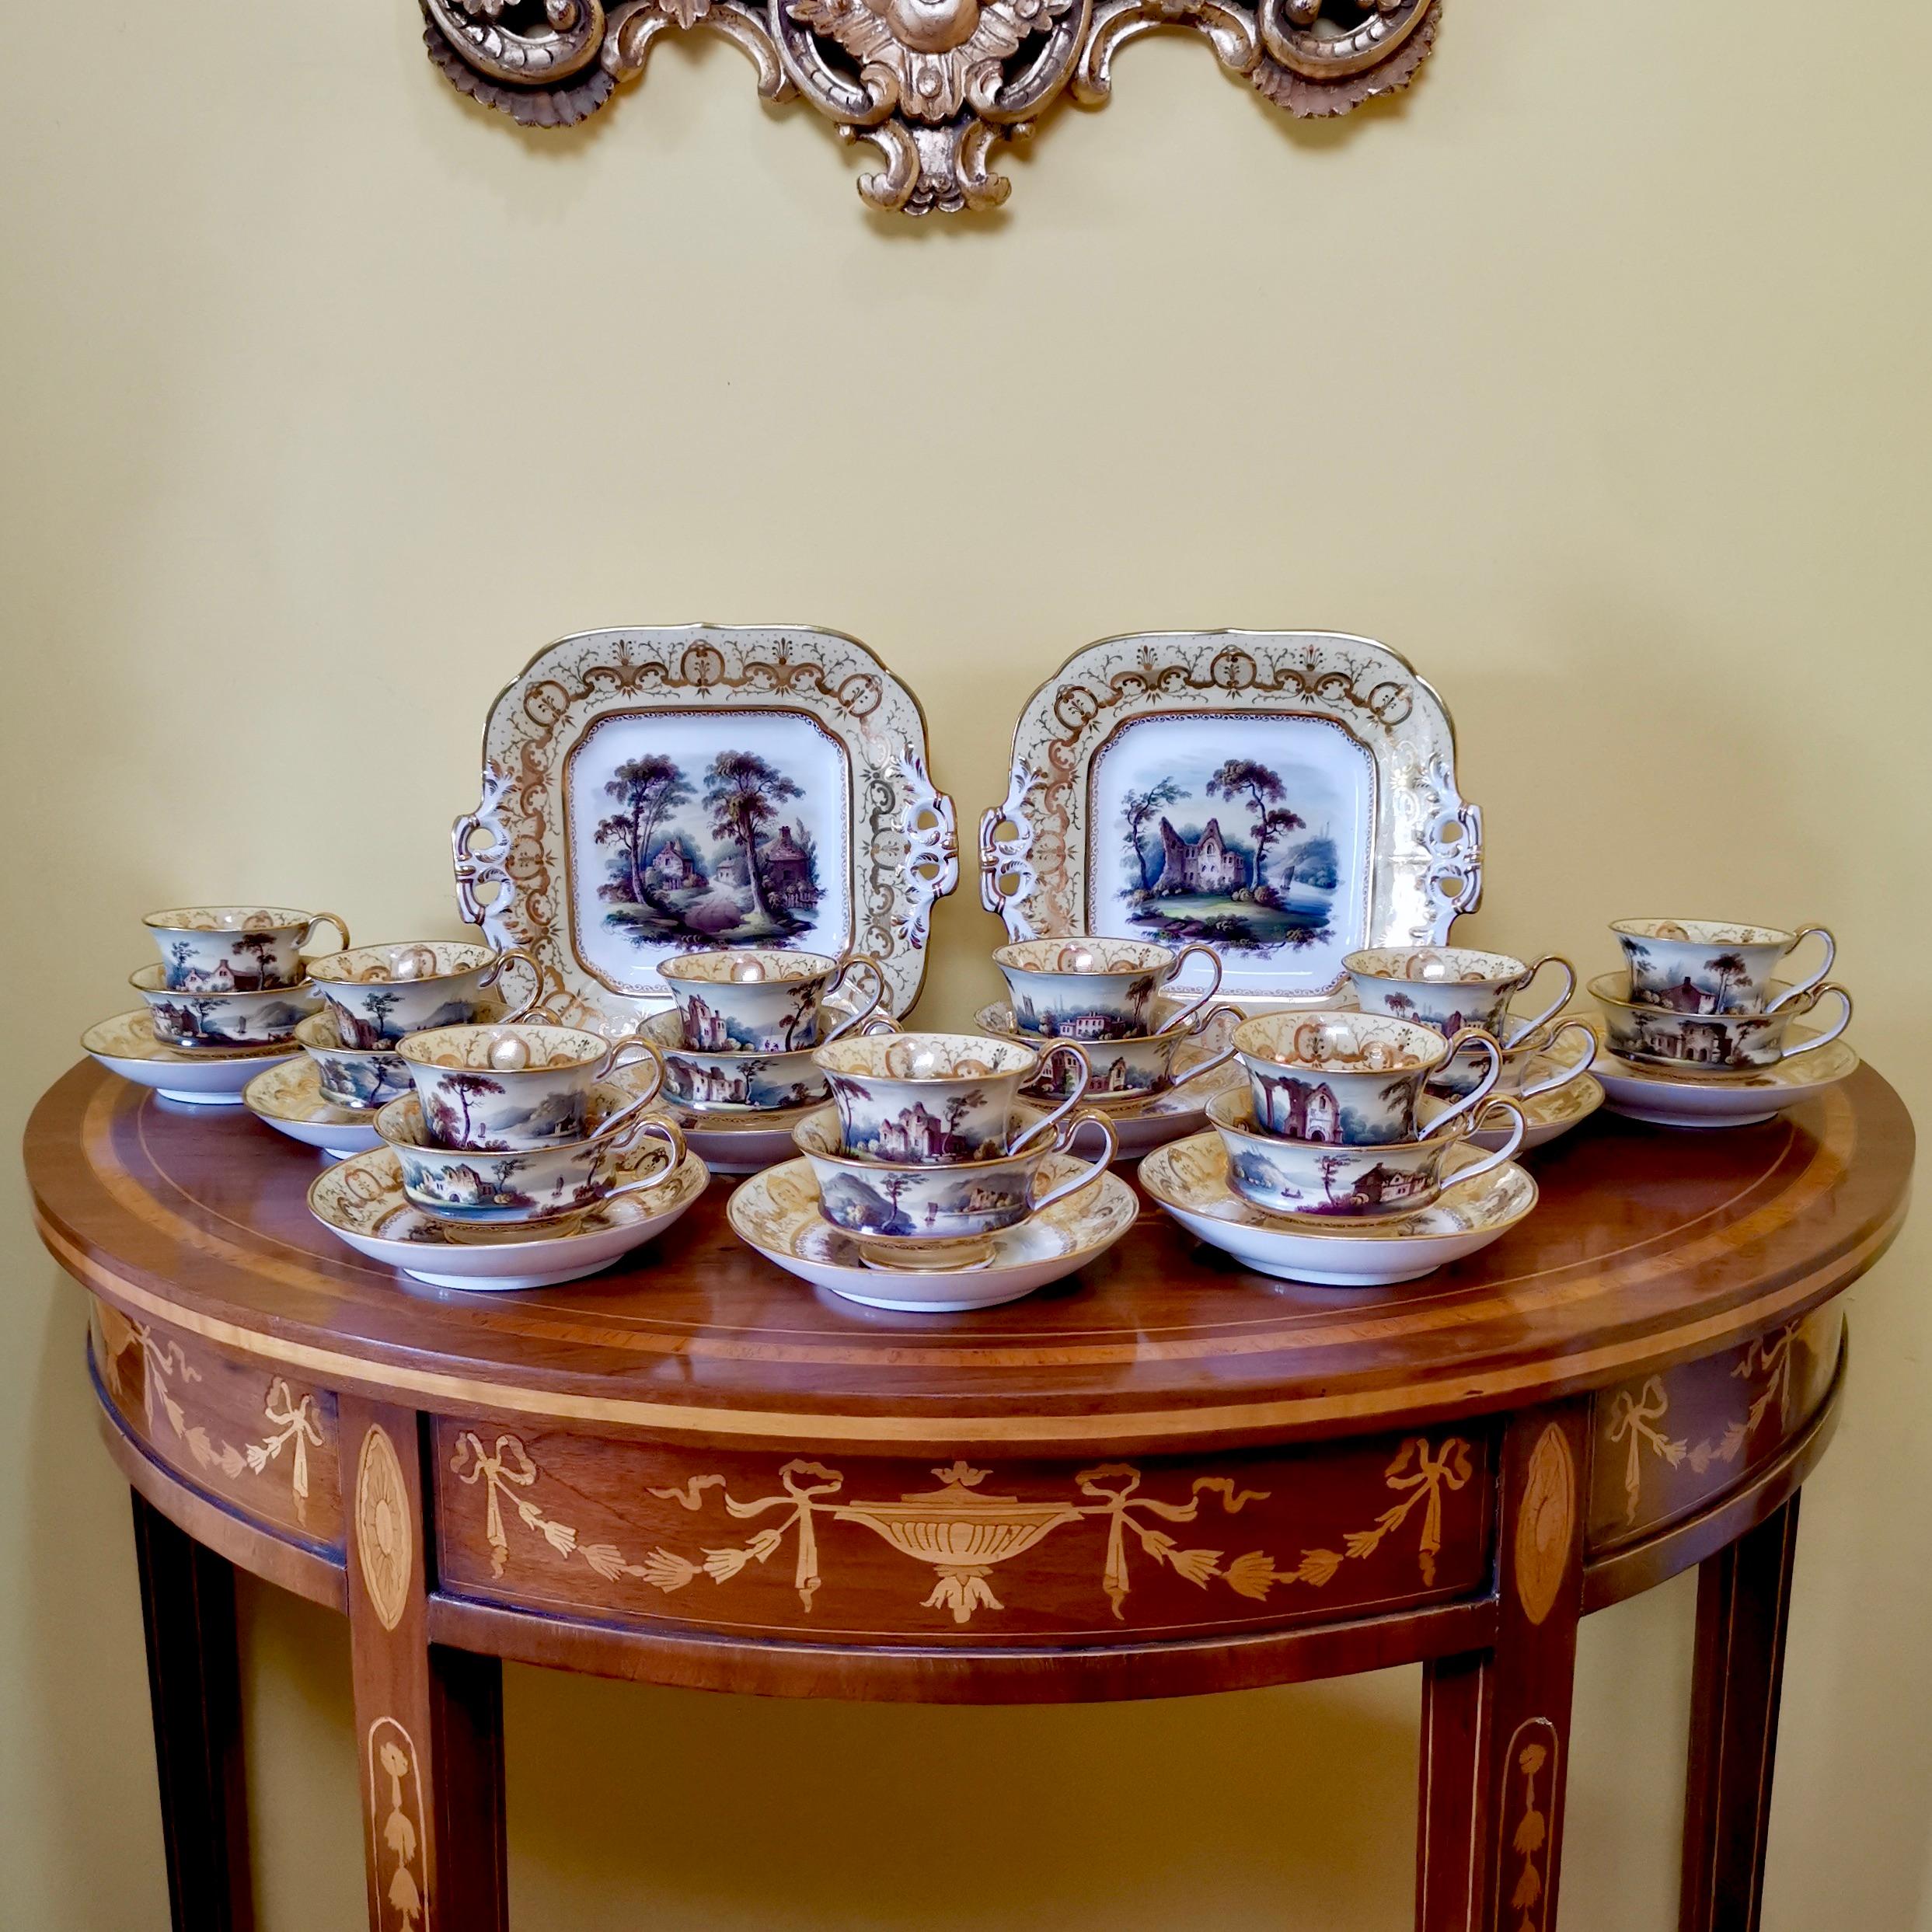 This is a stunning tea service consisting of nine true trios and two cake plates, made by Minton in circa 1825. The service is extremely rare; it has a yellow ground with sublimely hand painted landscapes. It has provenance; it came from the